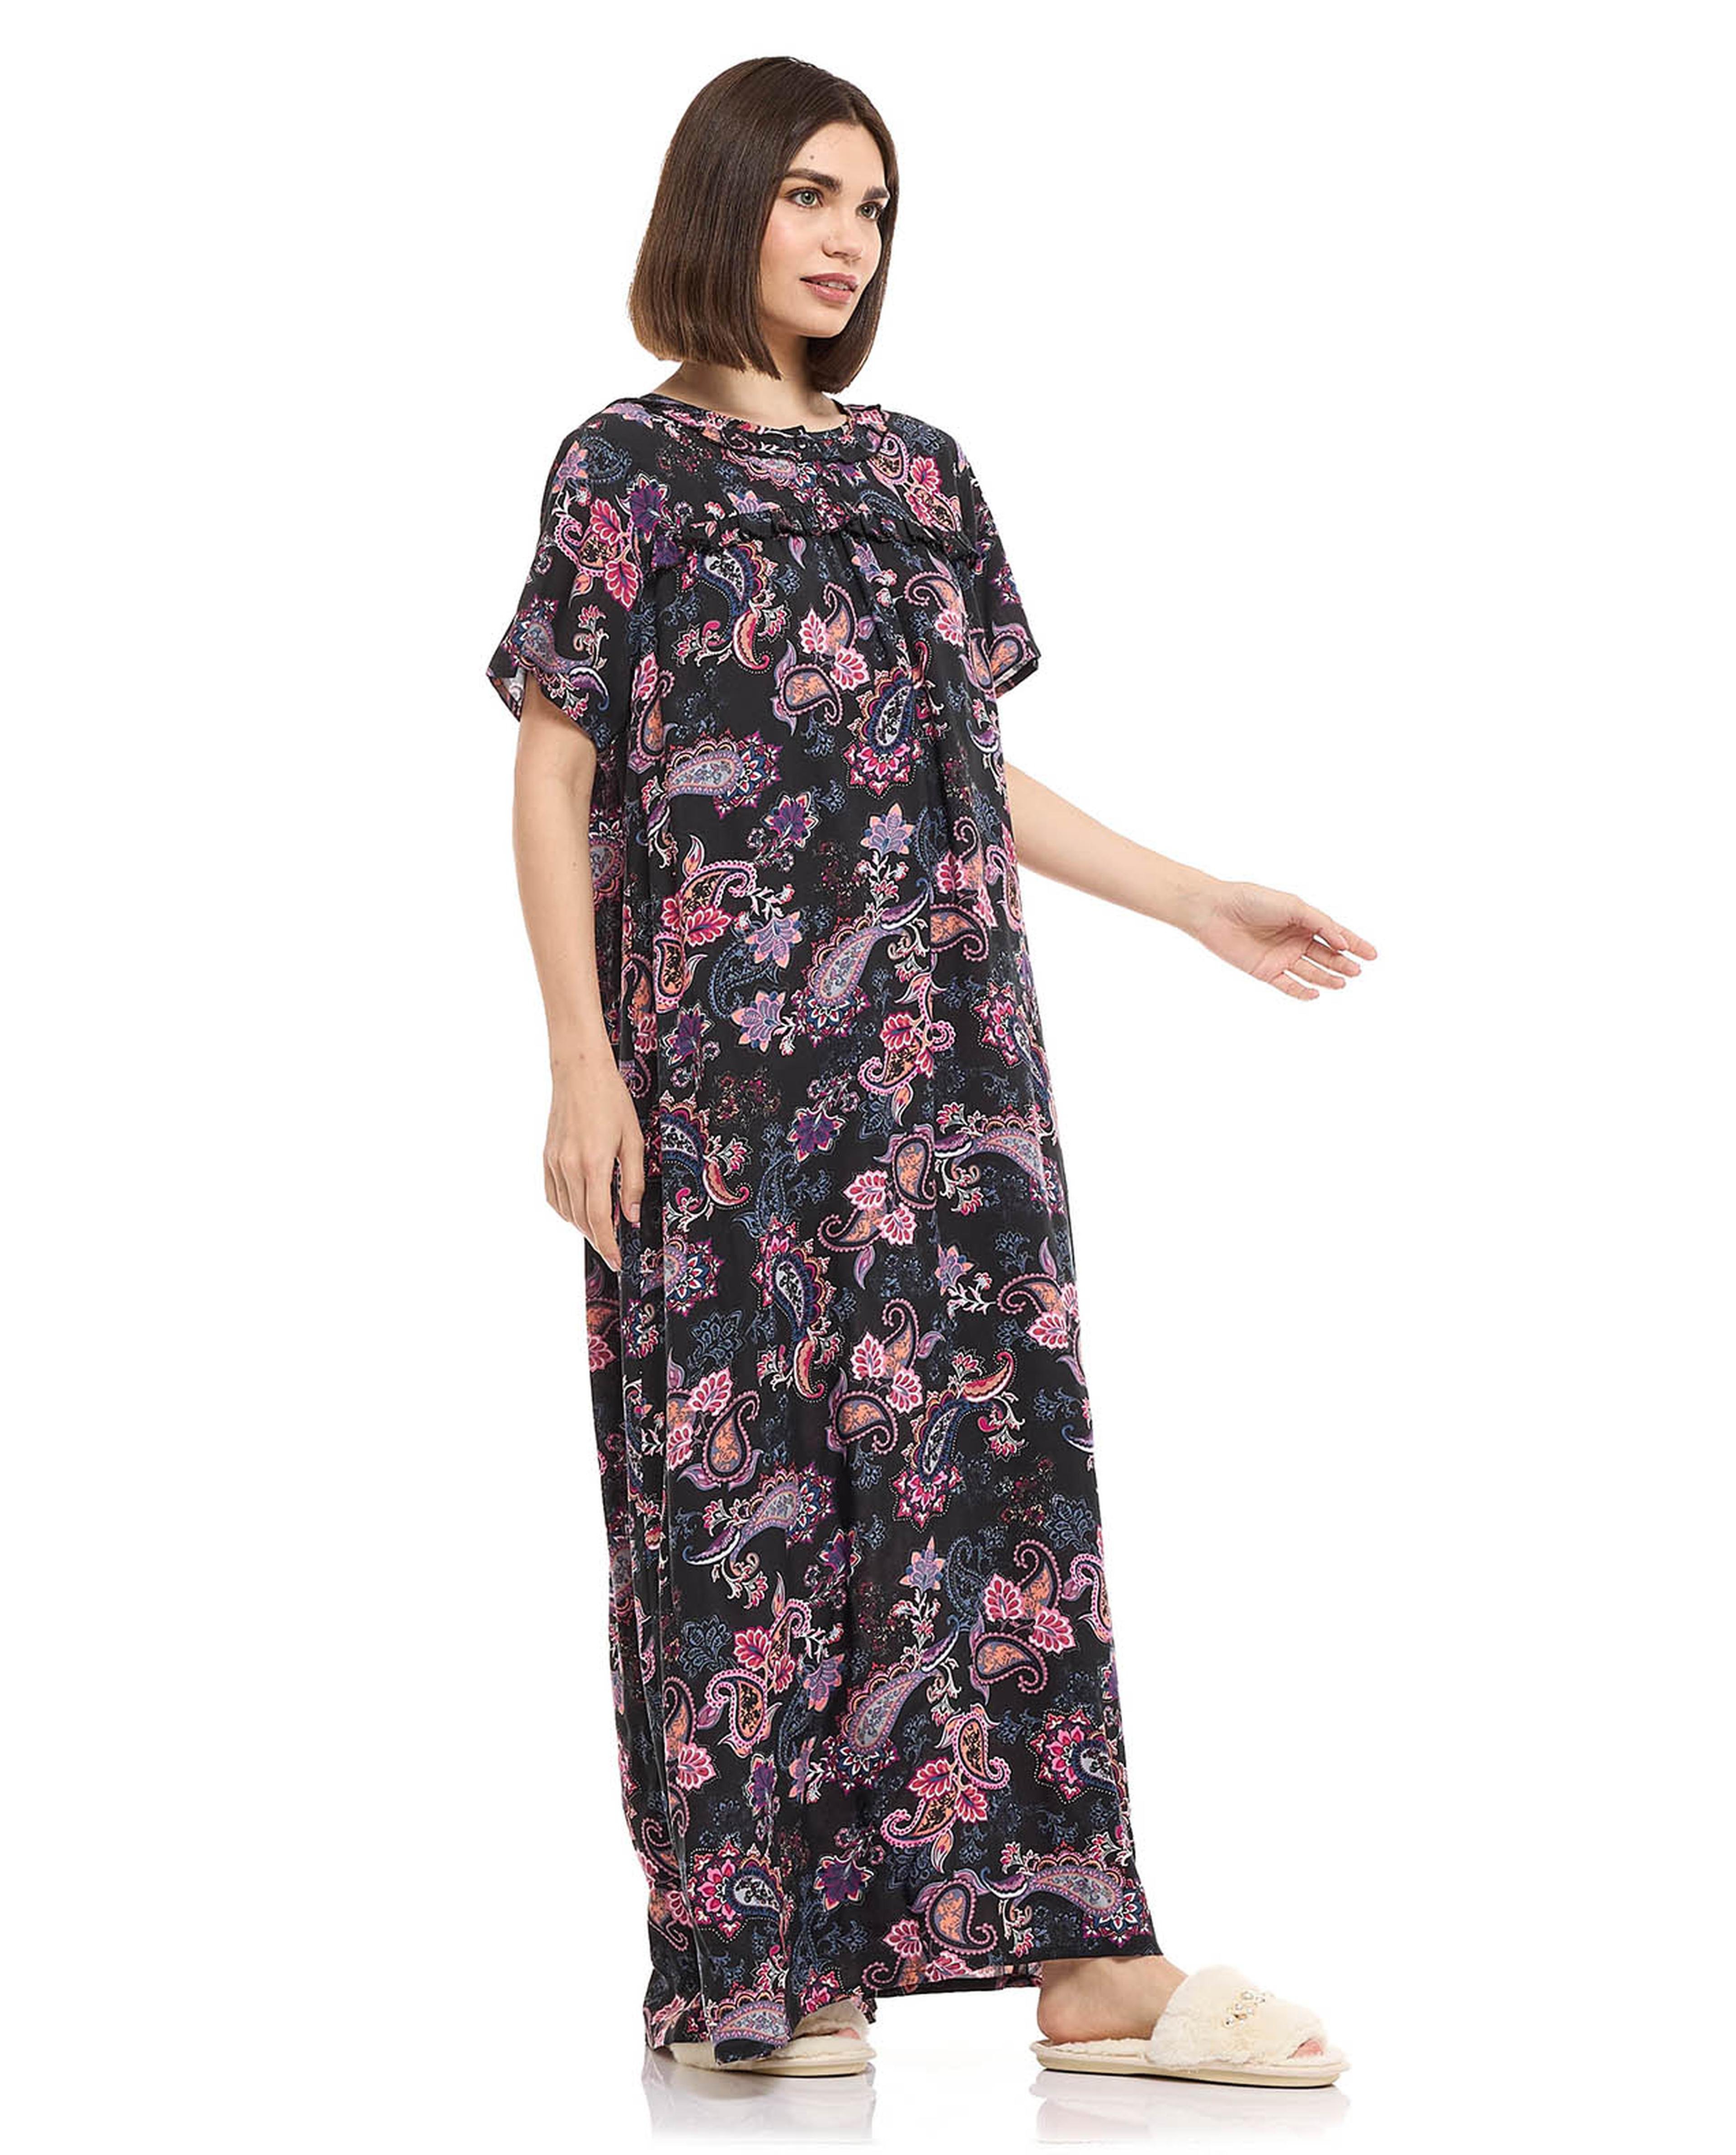 Floral Print Night Gown with Short Sleeves